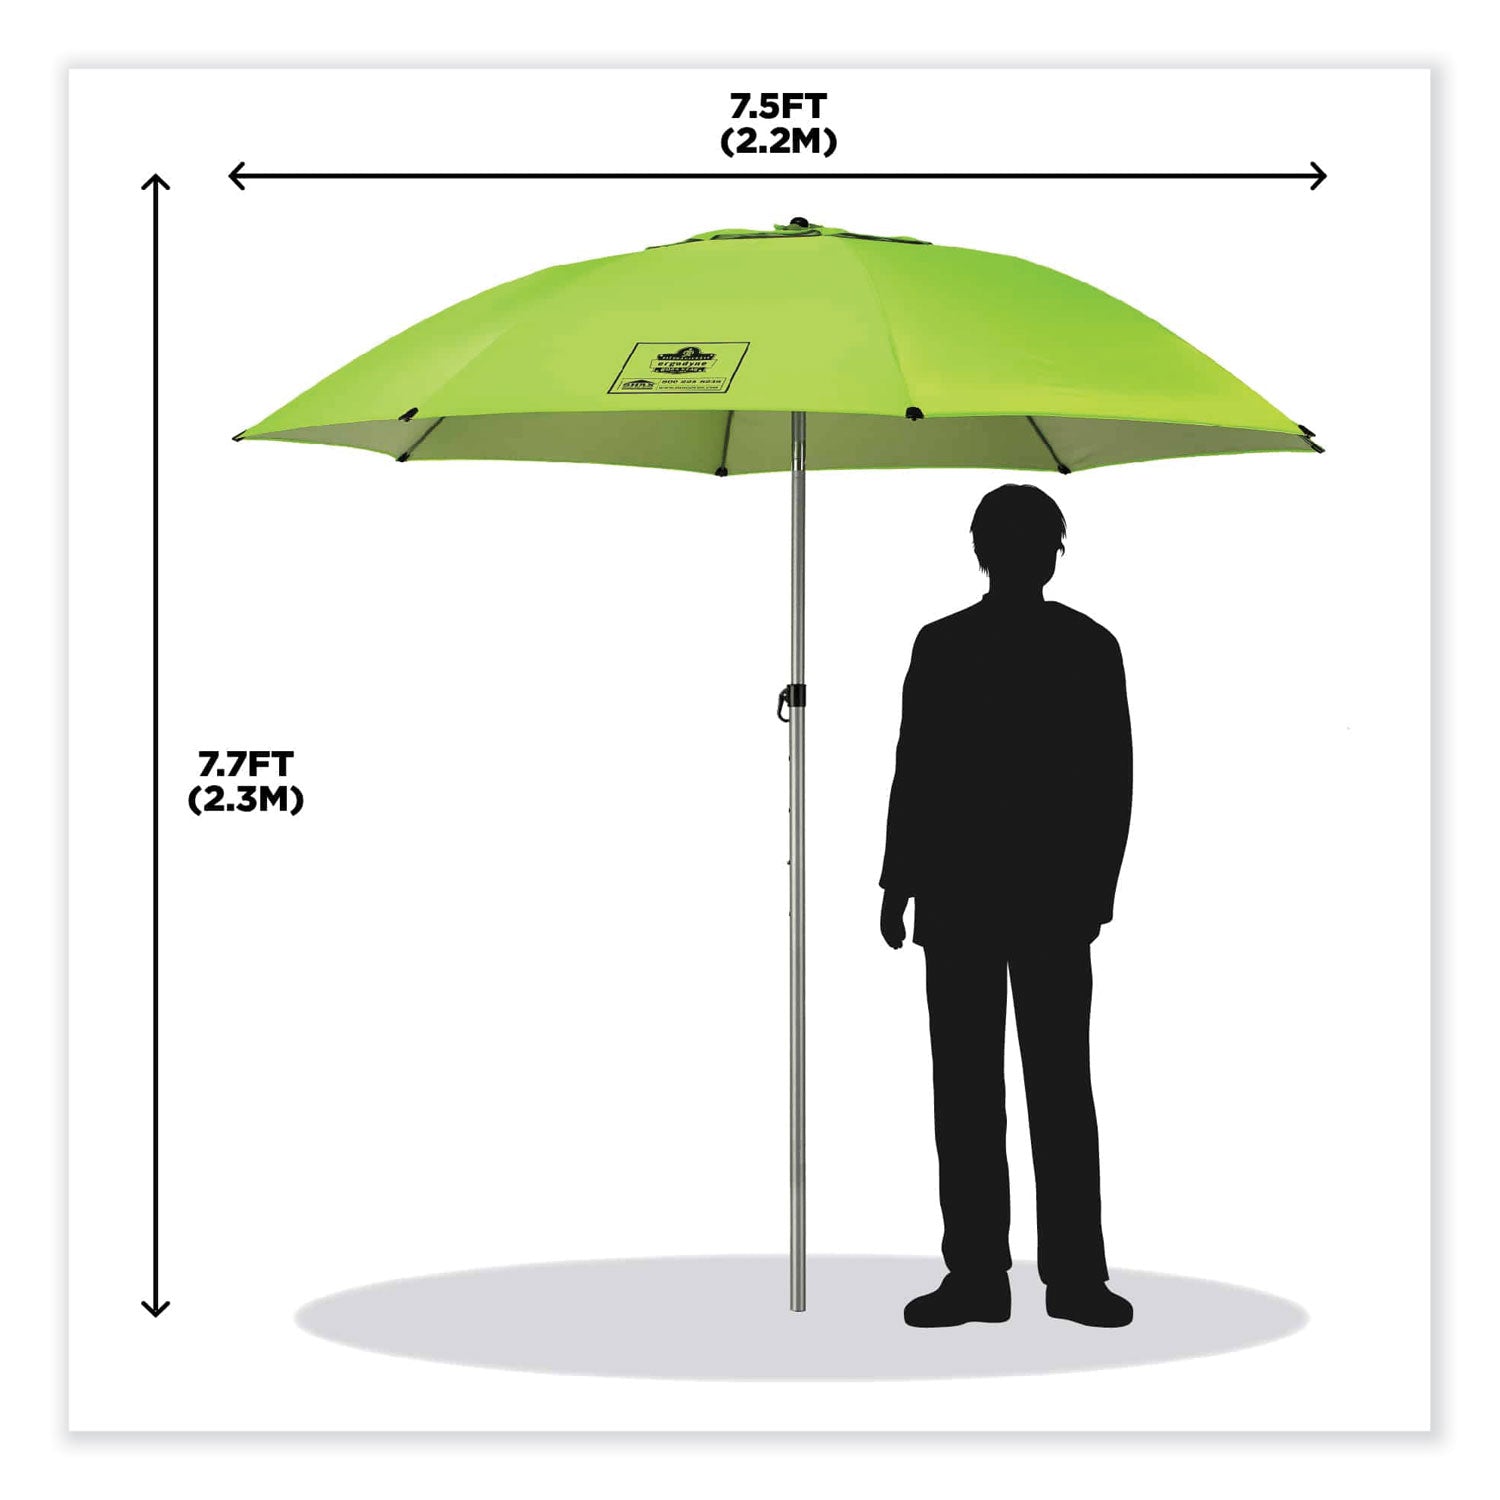 shax-6100-lightweight-work-umbrella-90-span-924-long-lime-canopy-ships-in-1-3-business-days_ego12967 - 3